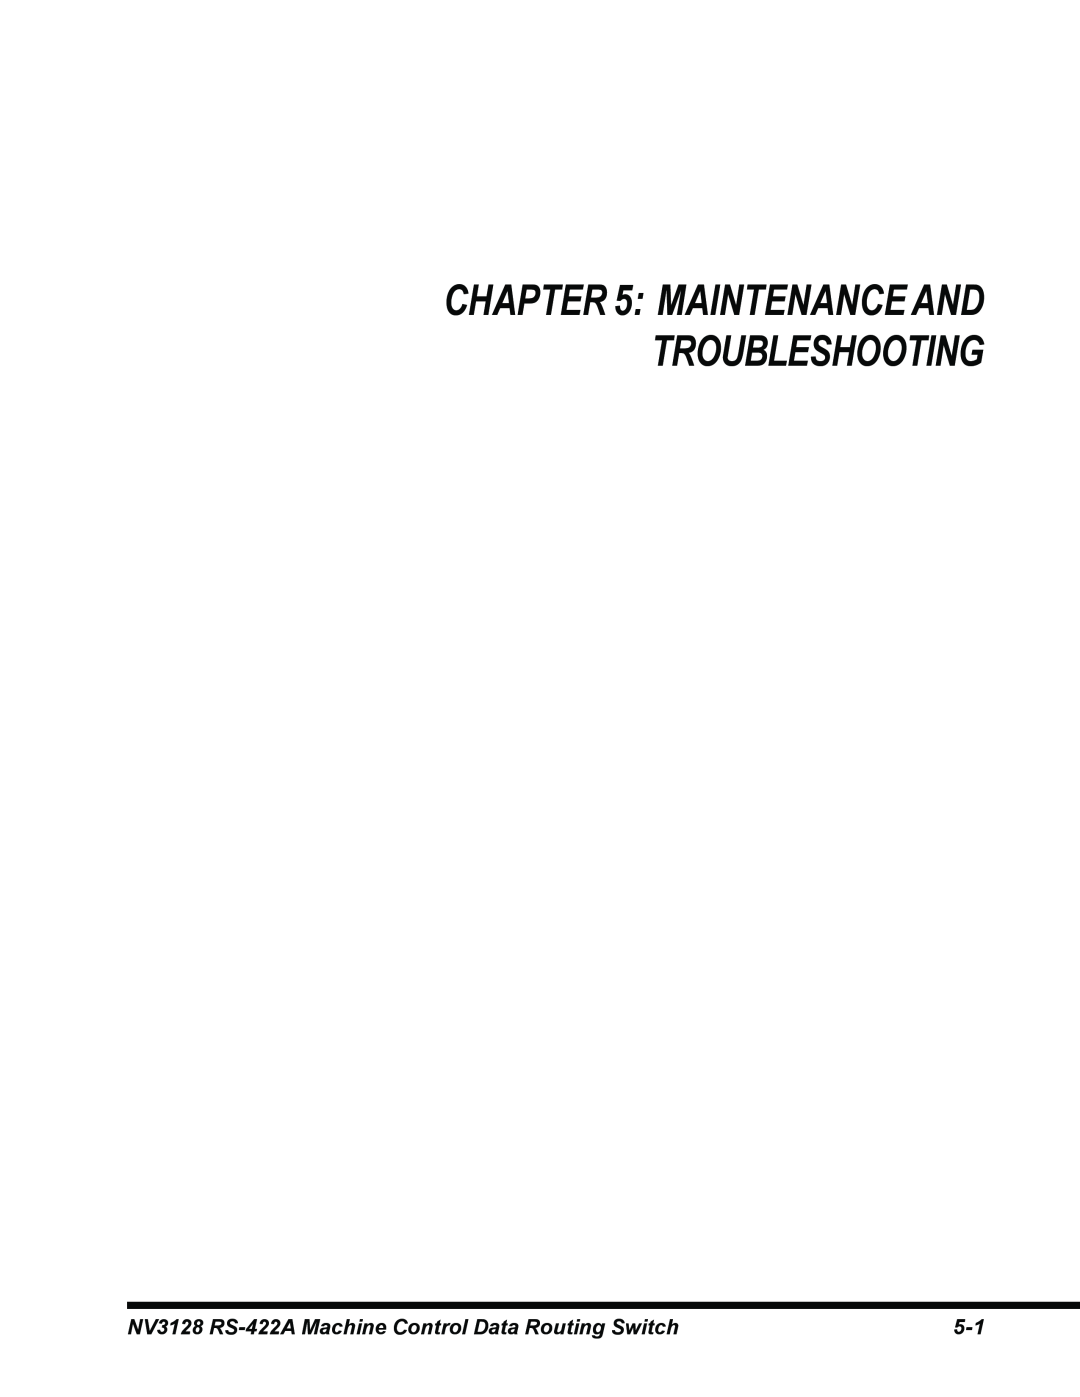 Envision Peripherals manual Maintenanceand Troubleshooting, NV3128 RS-422A Machine Control Data Routing Switch 